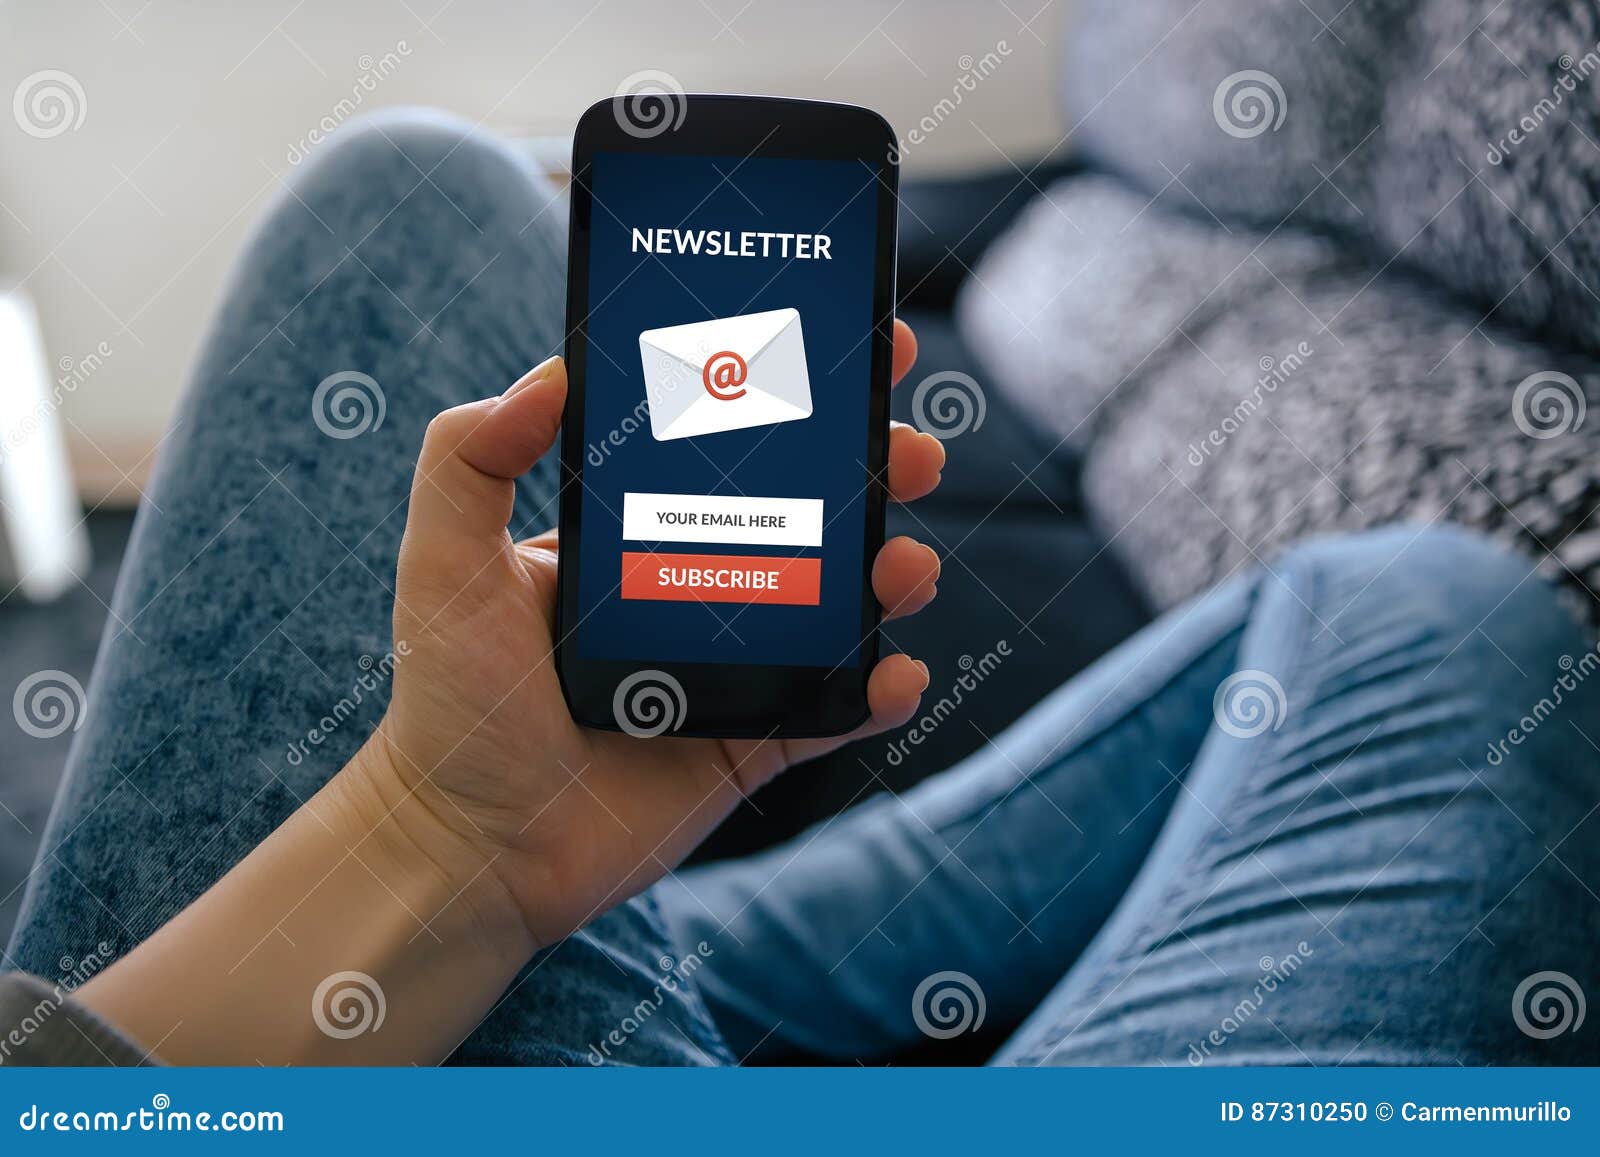 girl holding smart phone with subscribe newsletter concept on sc